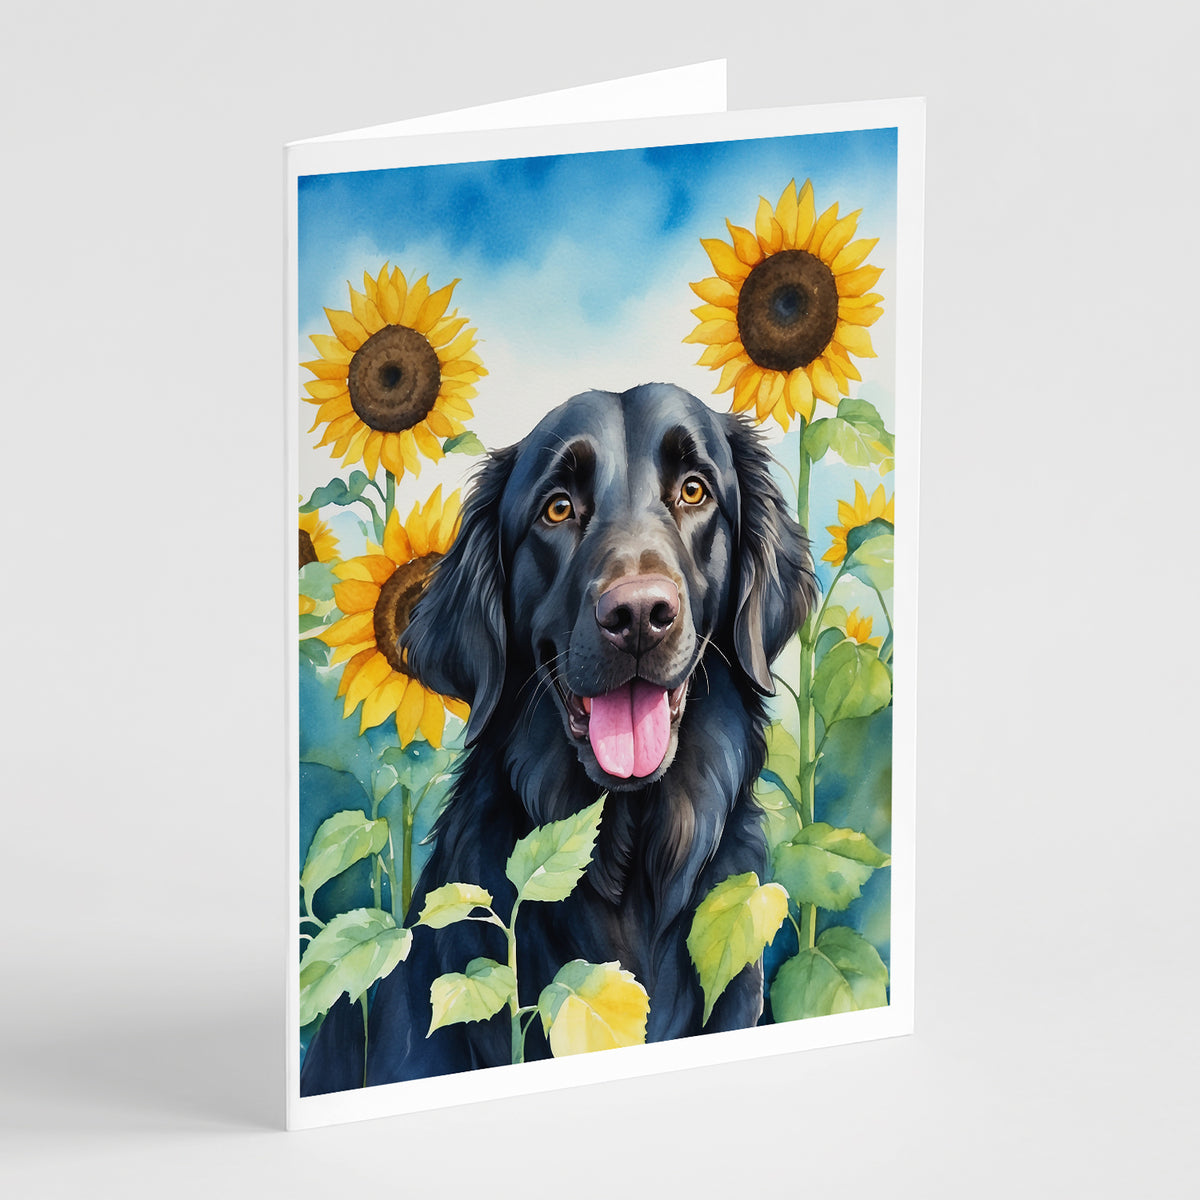 Buy this Flat-Coated Retriever in Sunflowers Greeting Cards Pack of 8